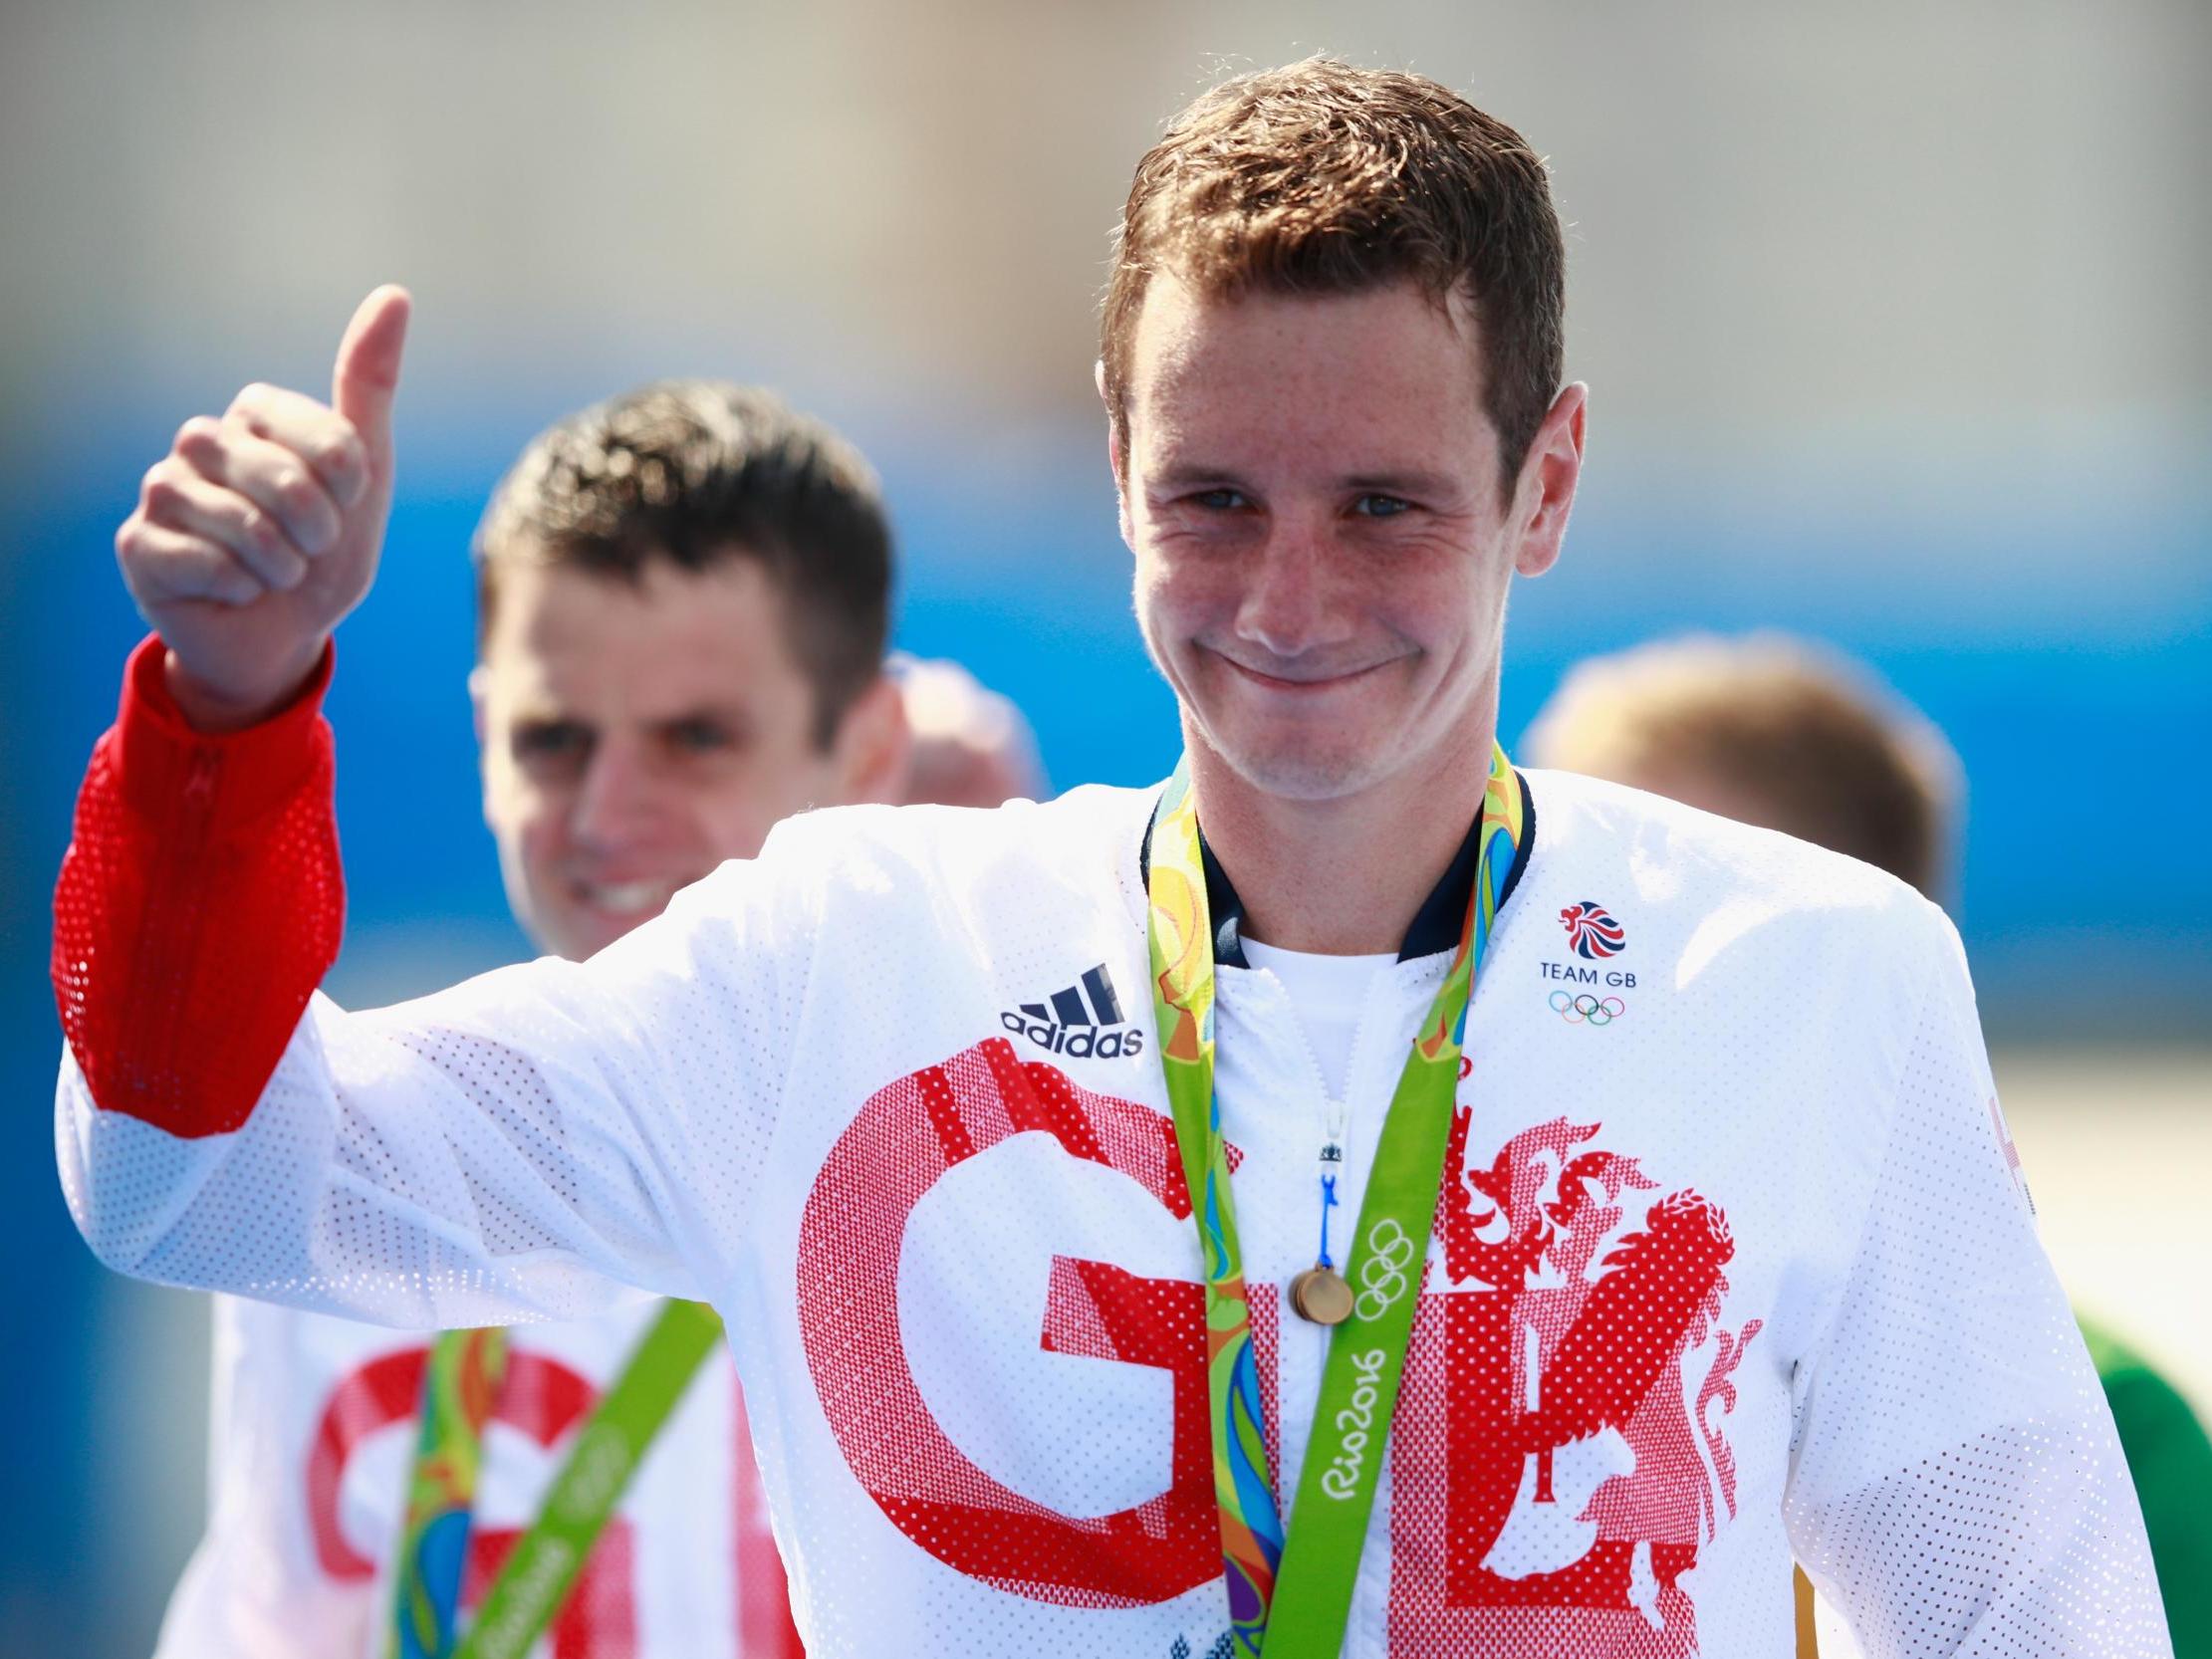 Brownlee is the proposed British candidate for the International Olympic Committee's Athletes' Commission